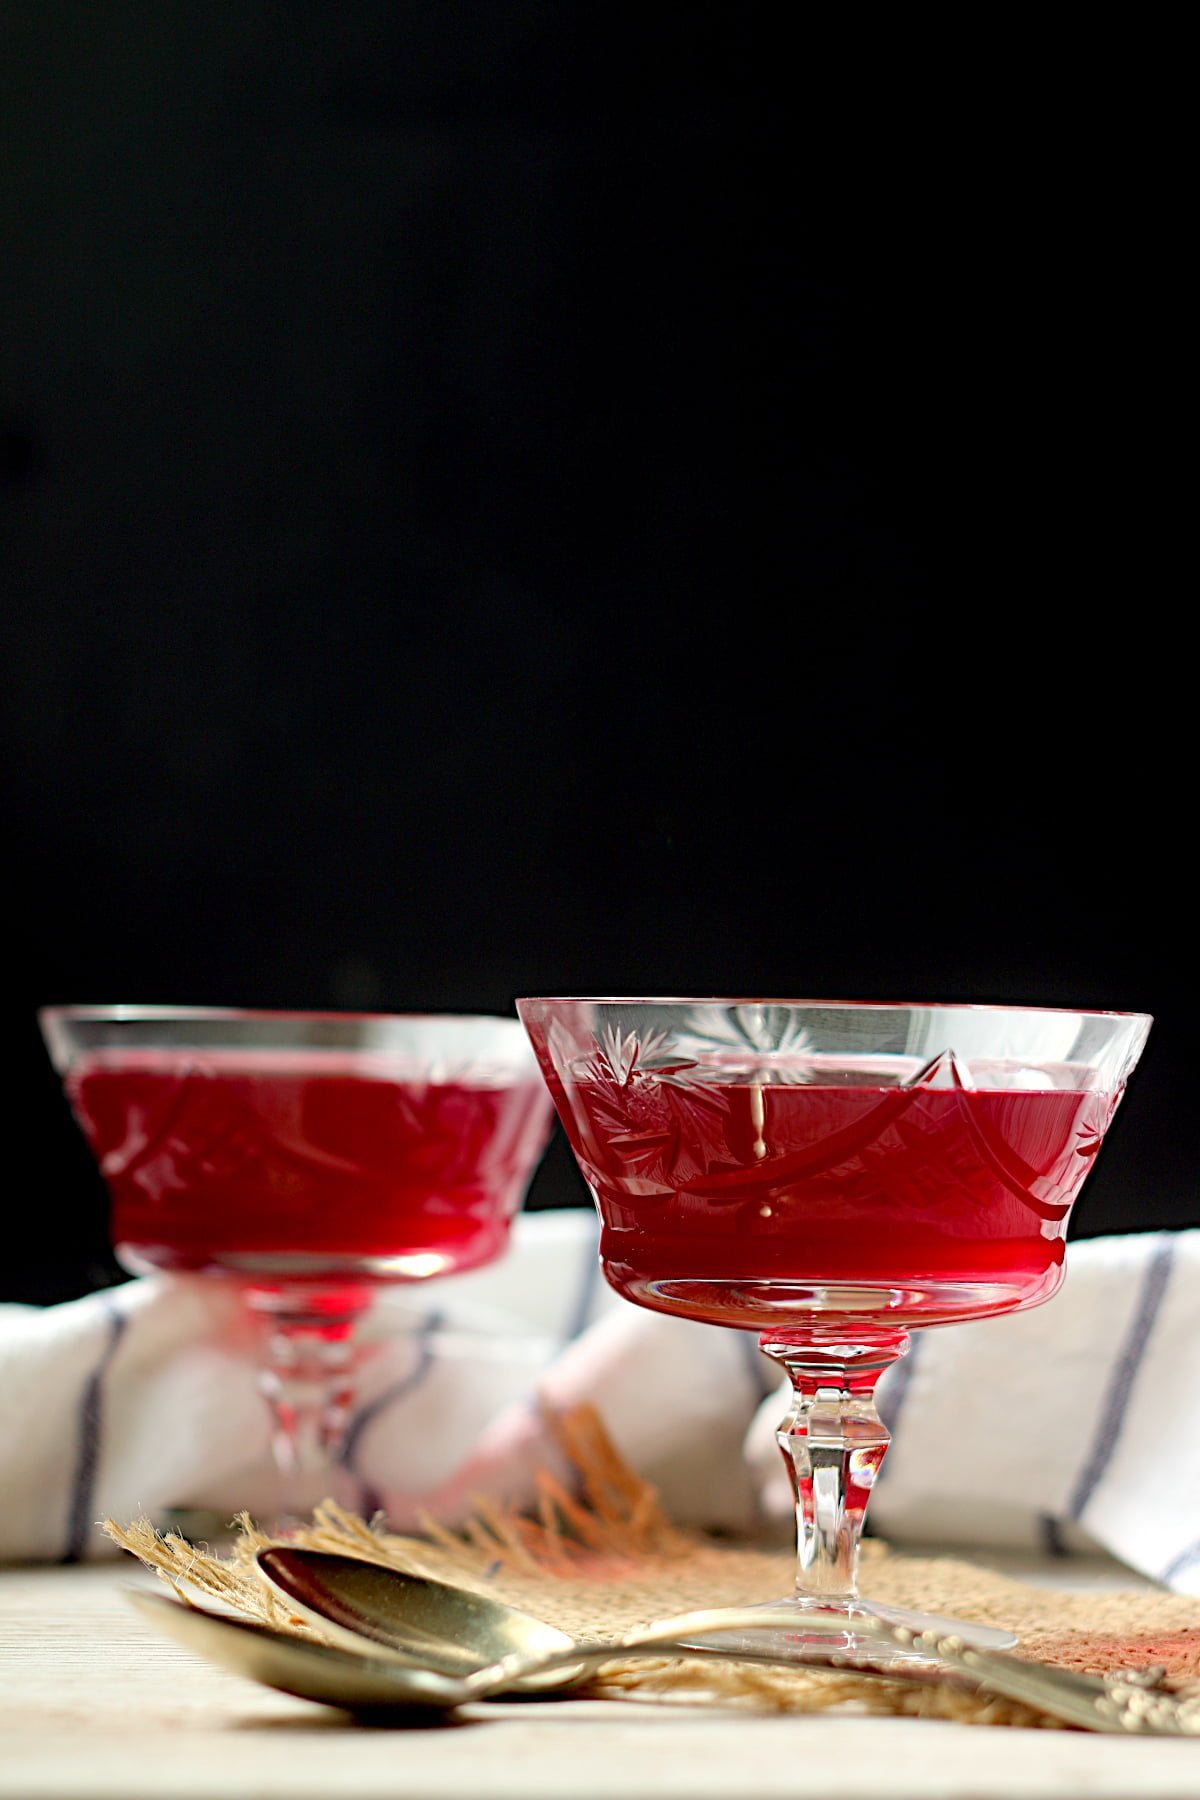 Two servings of red homemade jello in crystal glasses.